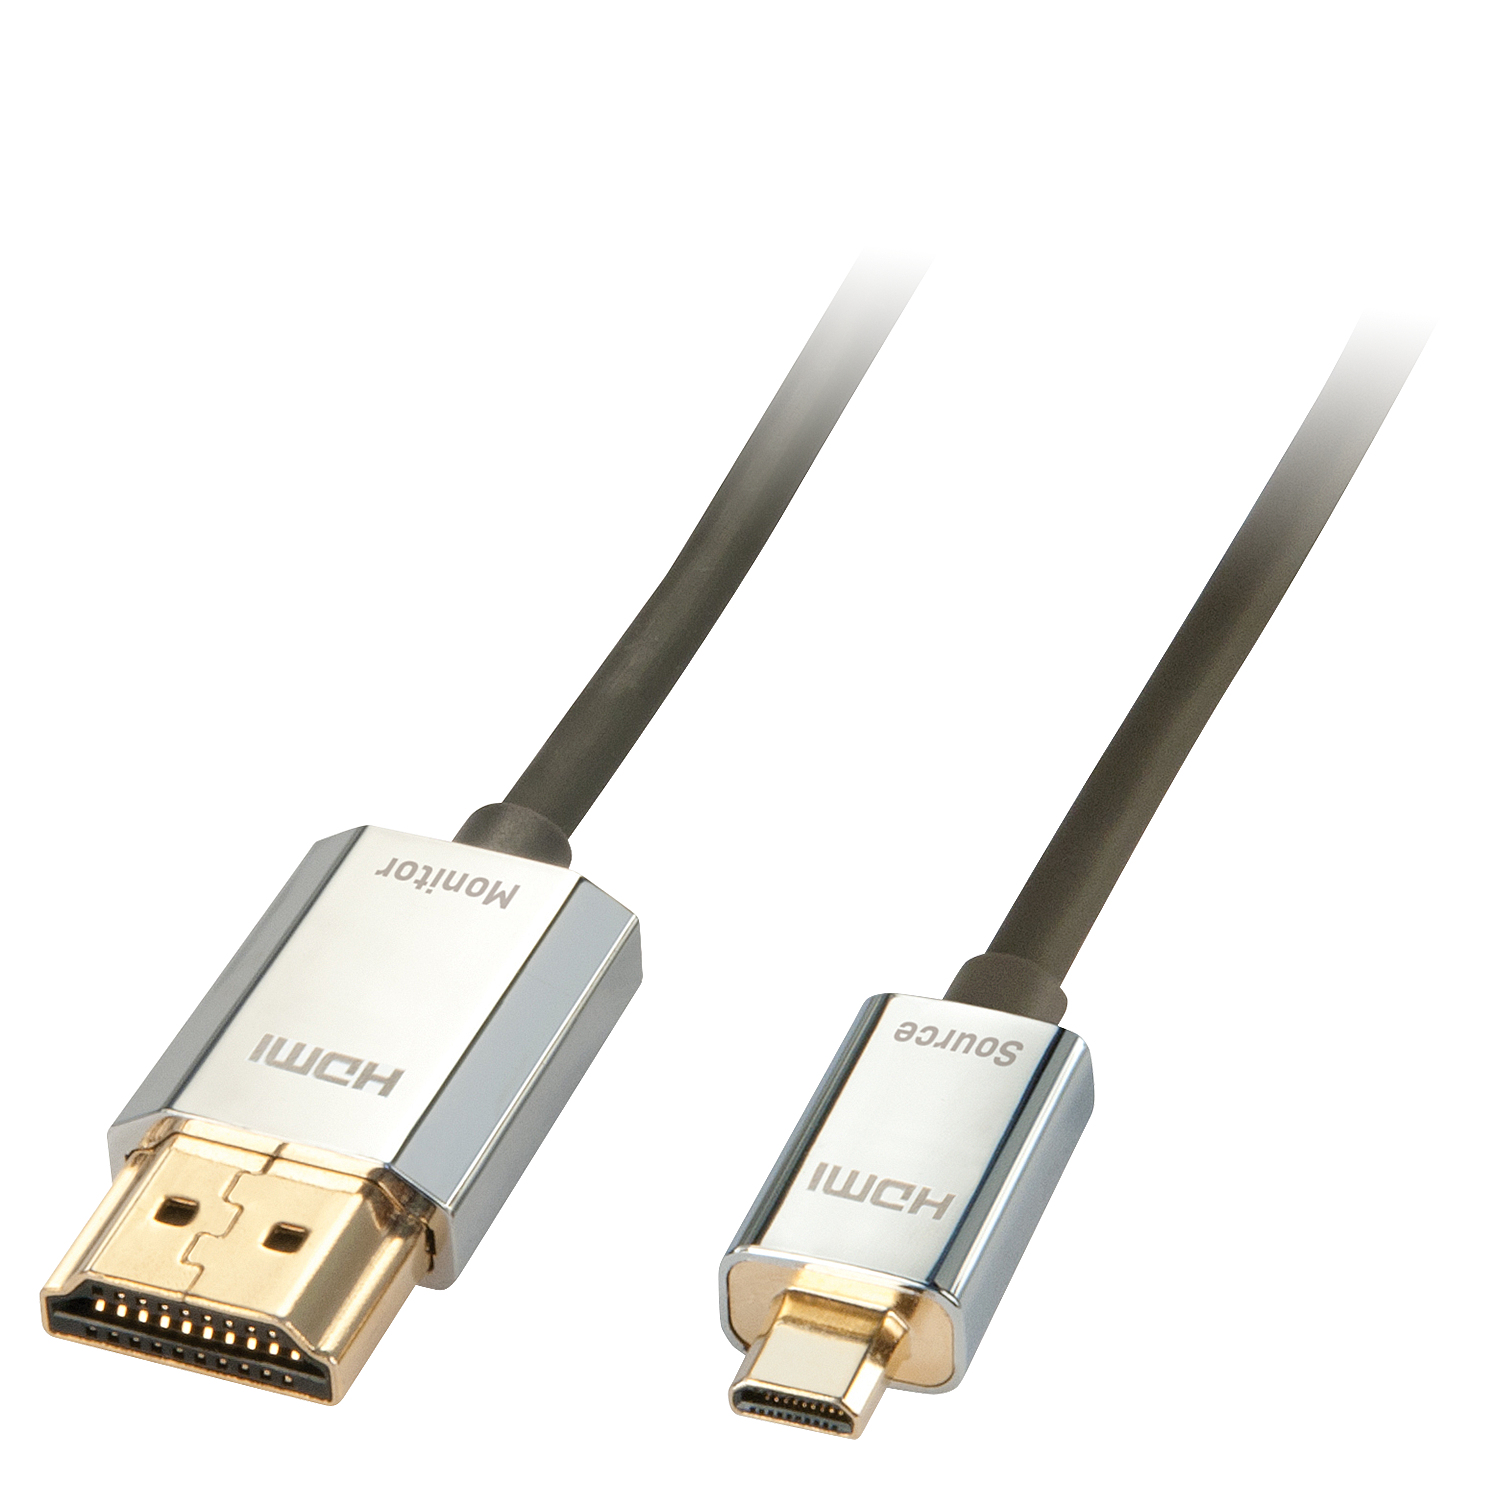 Photos - Cable (video, audio, USB) Lindy 4.5m CROMO Slim Active High Speed HDMI 2.0 A/D Cable with Ethern 416 